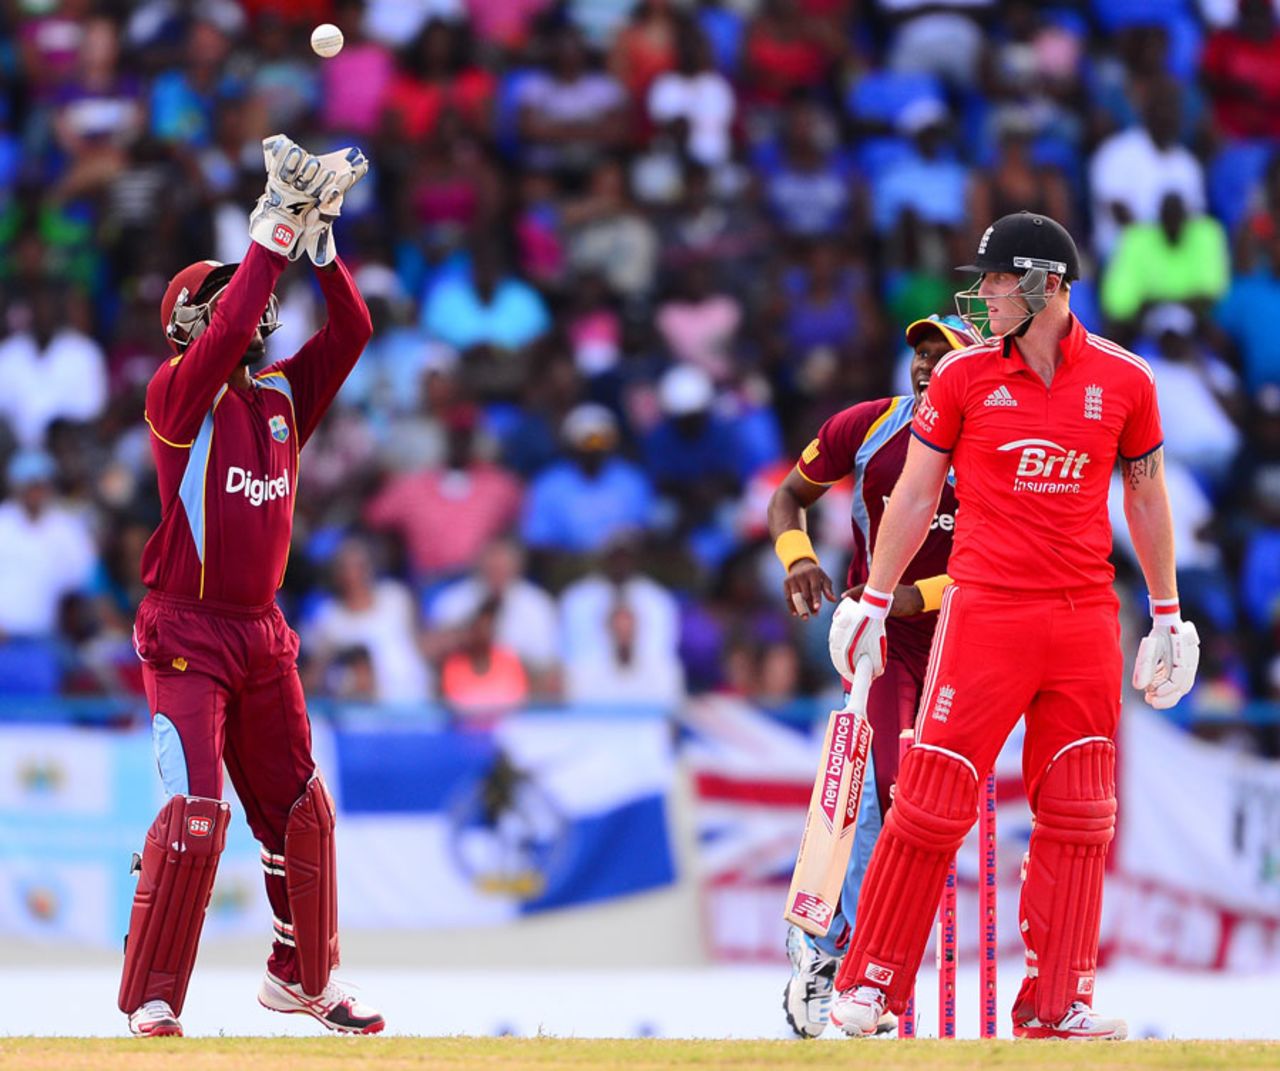 Ben Stokes walked off having been caught bat and pad, West Indies v England, 2nd ODI, North Sound, March 2, 2014